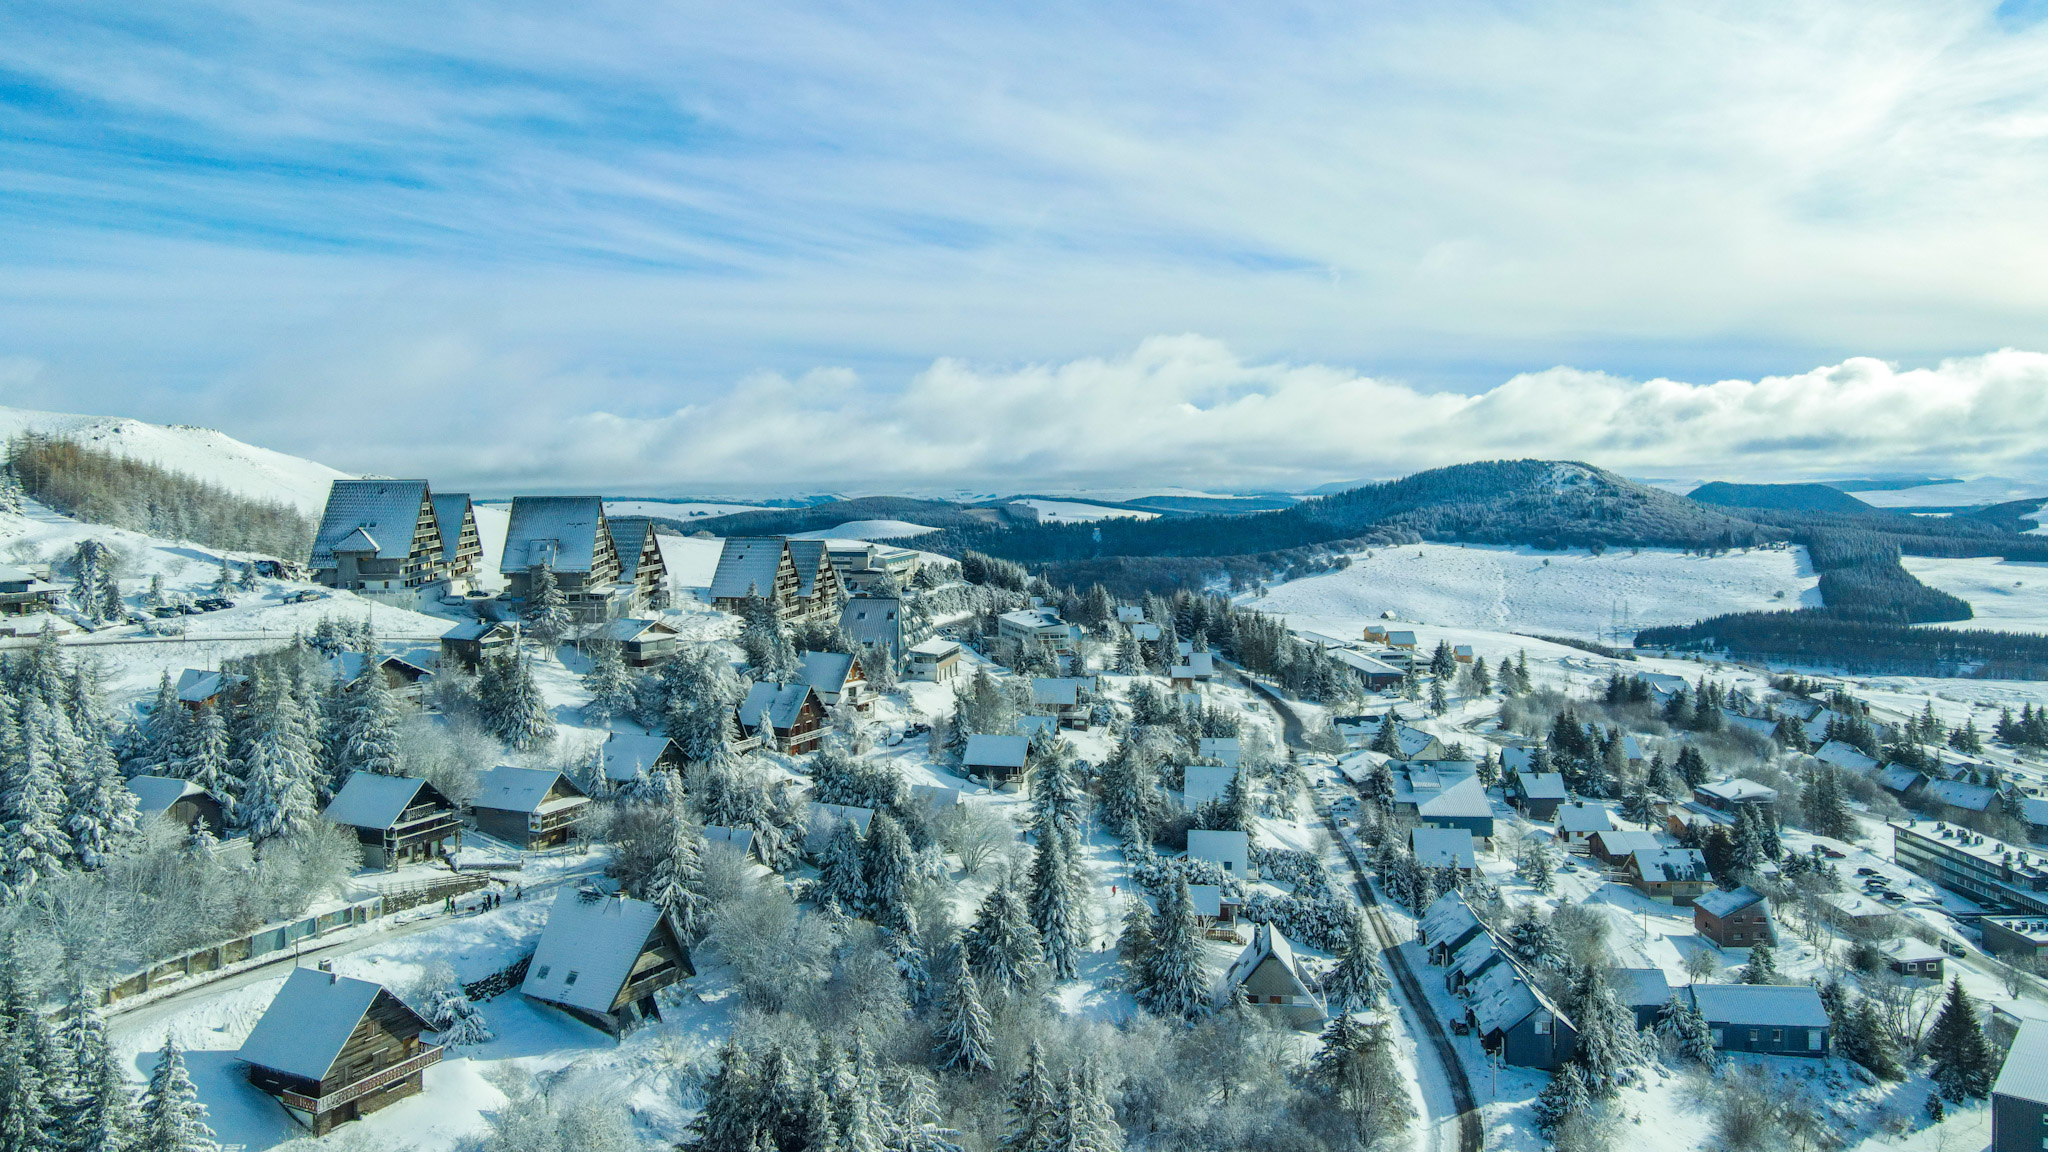 Super Besse seen from the sky, the village of Chalets and the residences under the snow